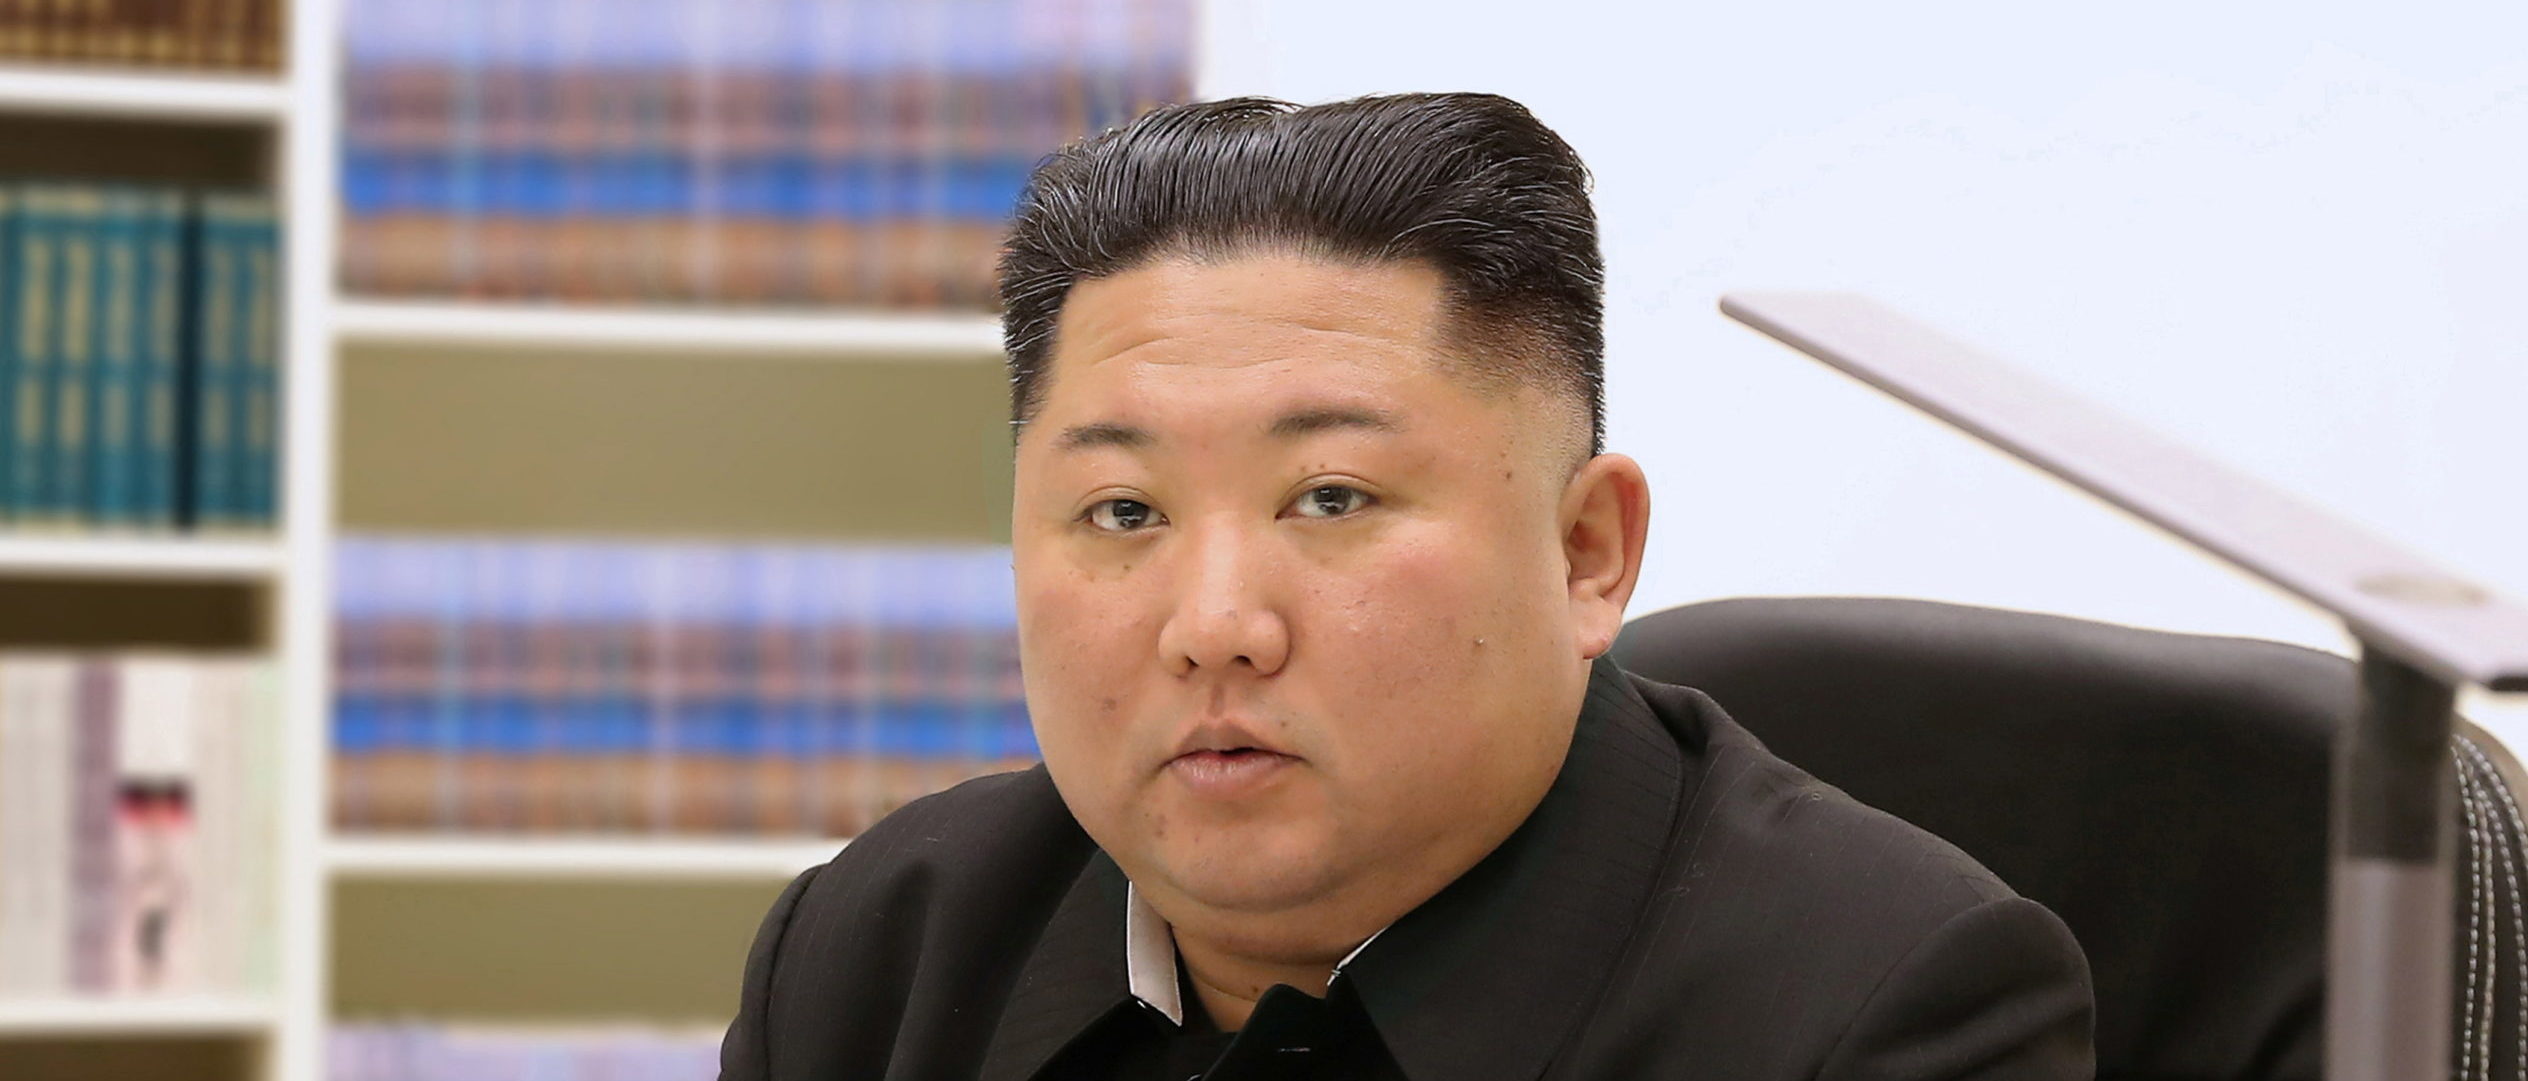 North Korean leader Kim Jong Un pens a letter to all people on New Year's day in this photo supplied by North Korea's Korean Central News Agency (KCNA) on December 31, 2020. KCNA/via REUTERS